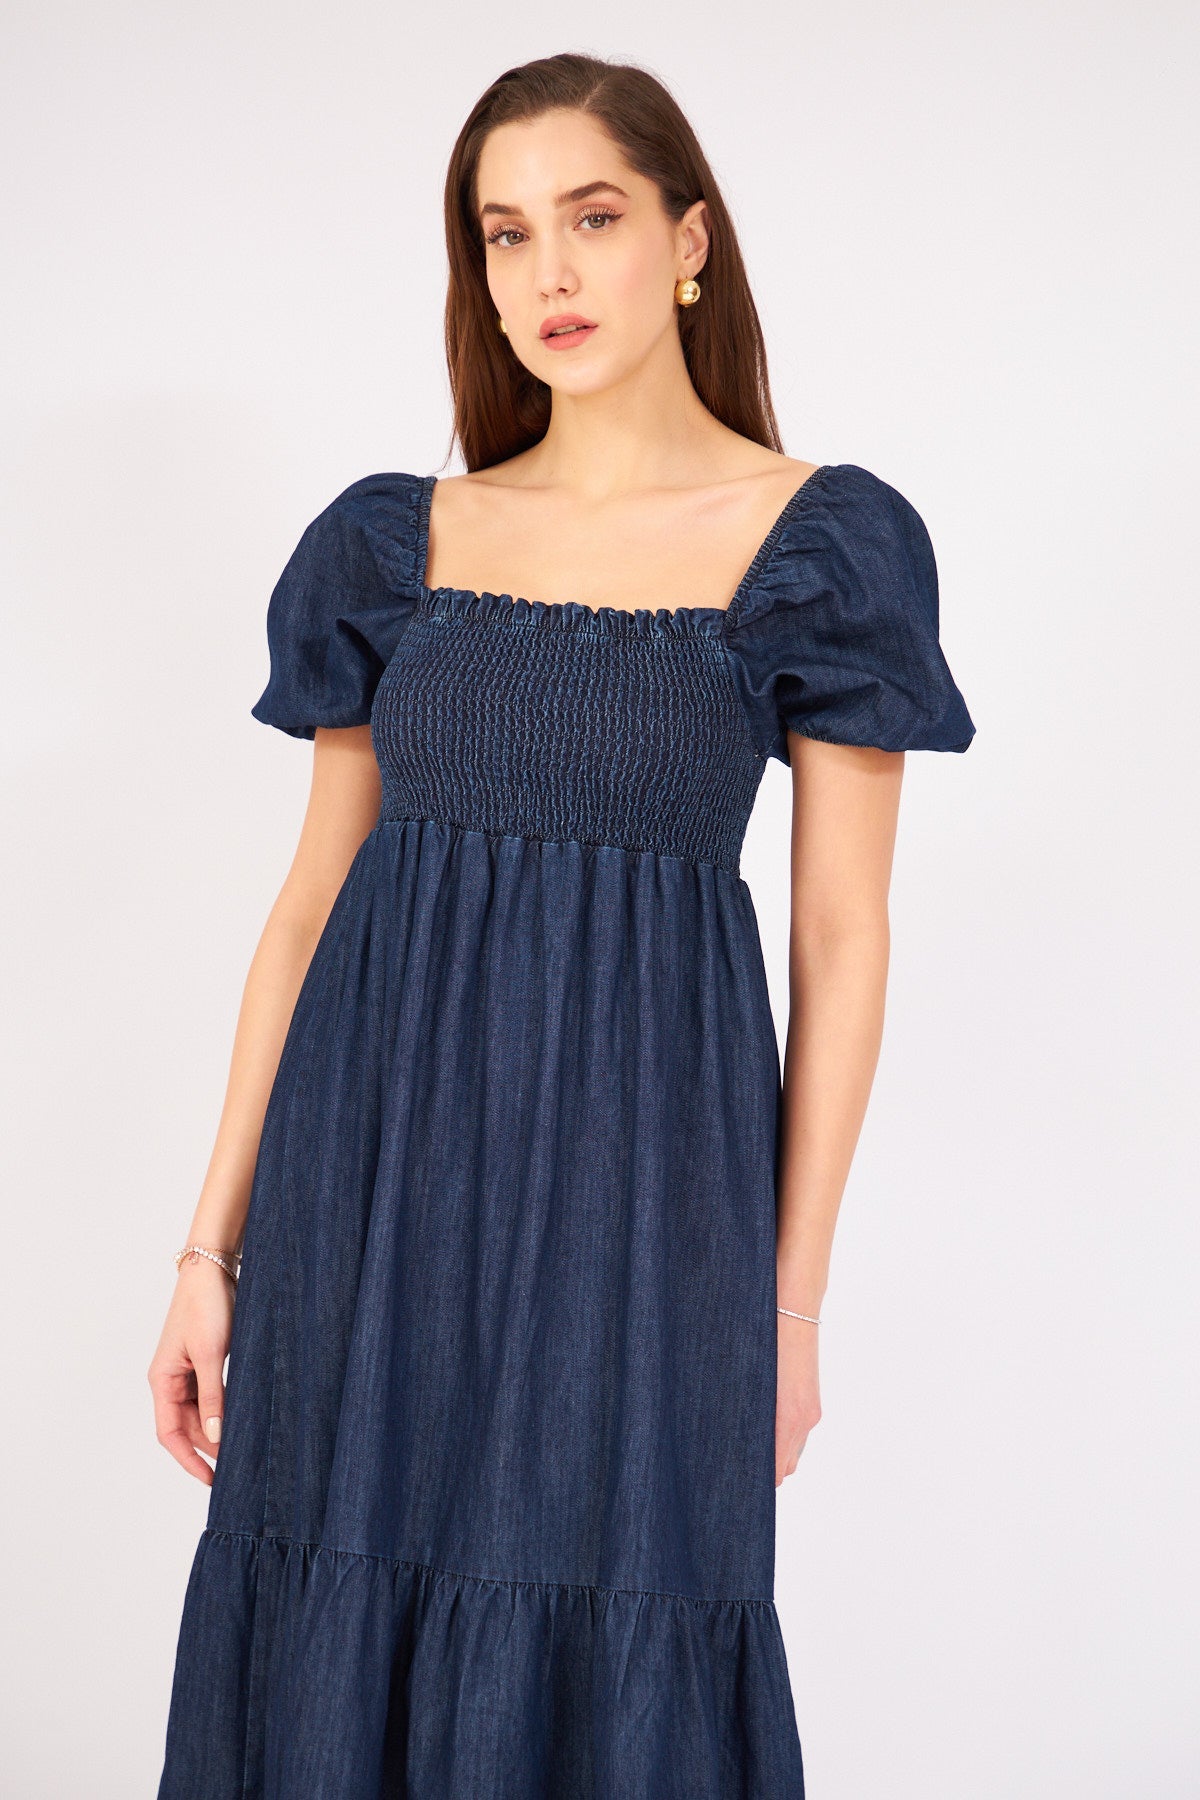 BLUE JEANS CHEST TIPPED DRESS - Lebbse